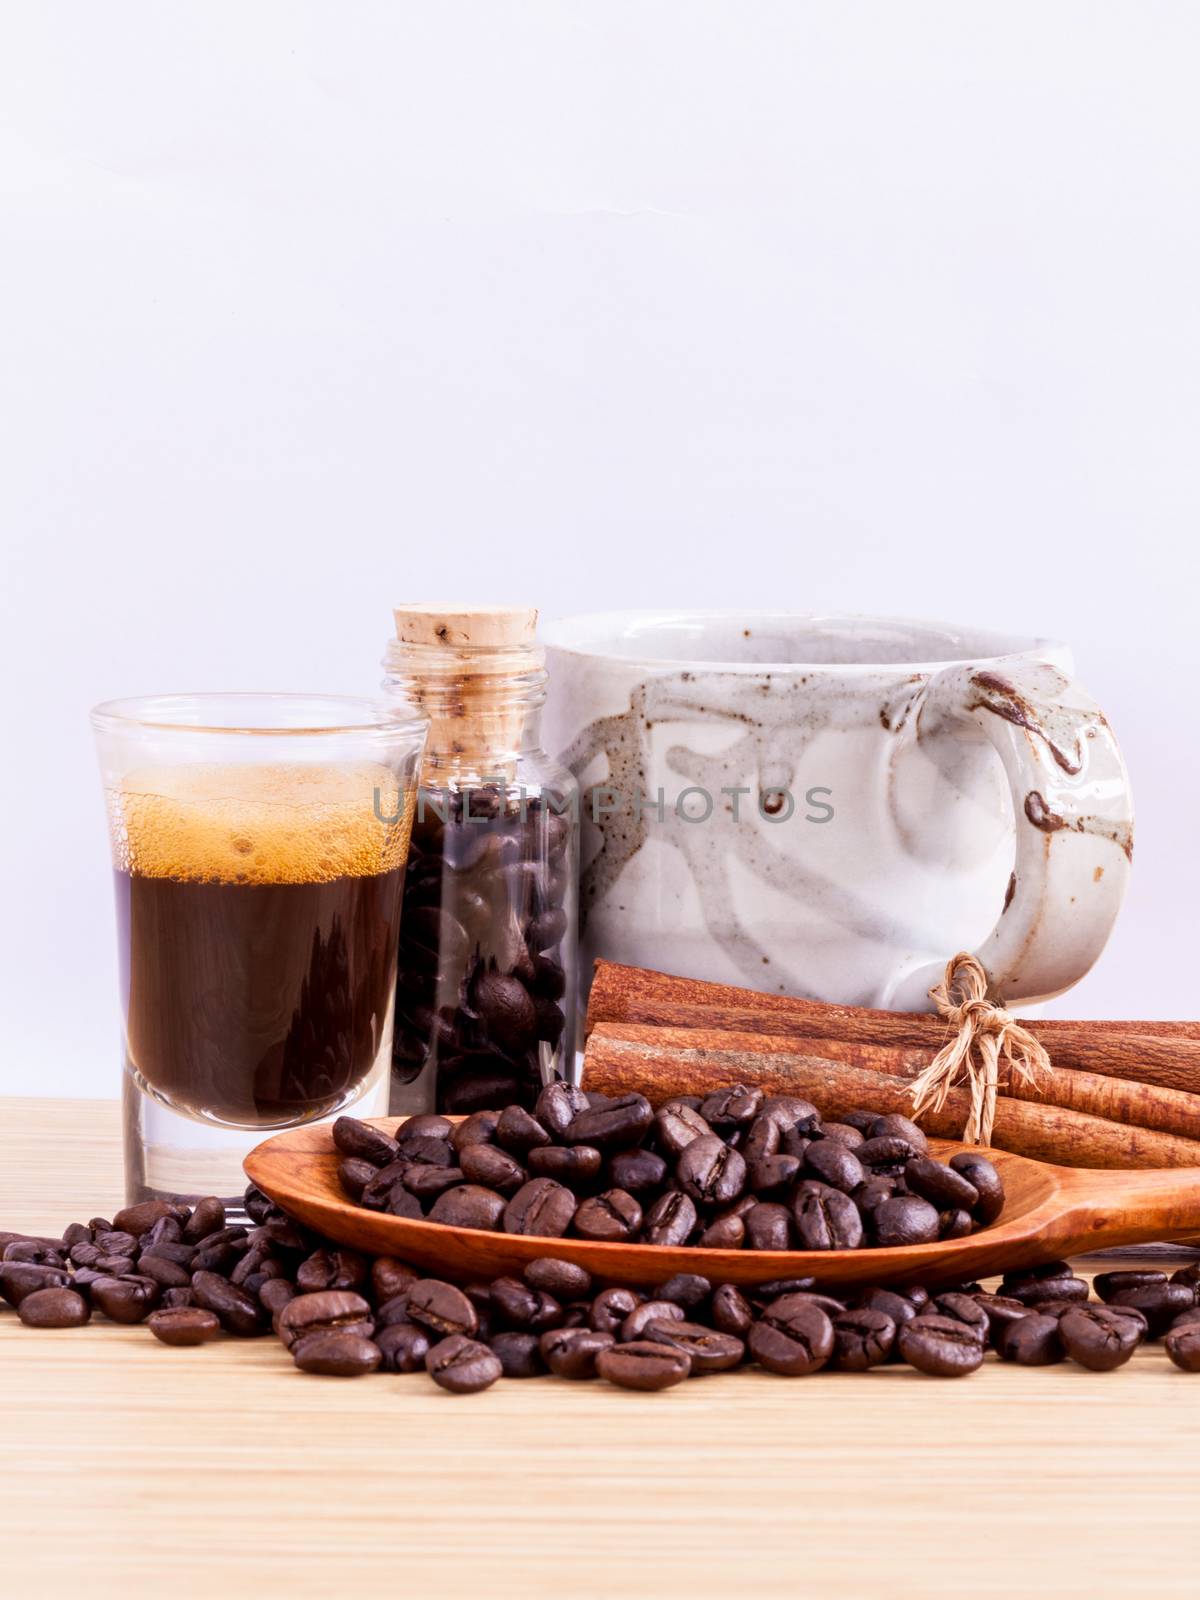 A Coffee cup and coffee beans on  wooden panel - With copy space,concept for Coffee and Aroma refreshing.